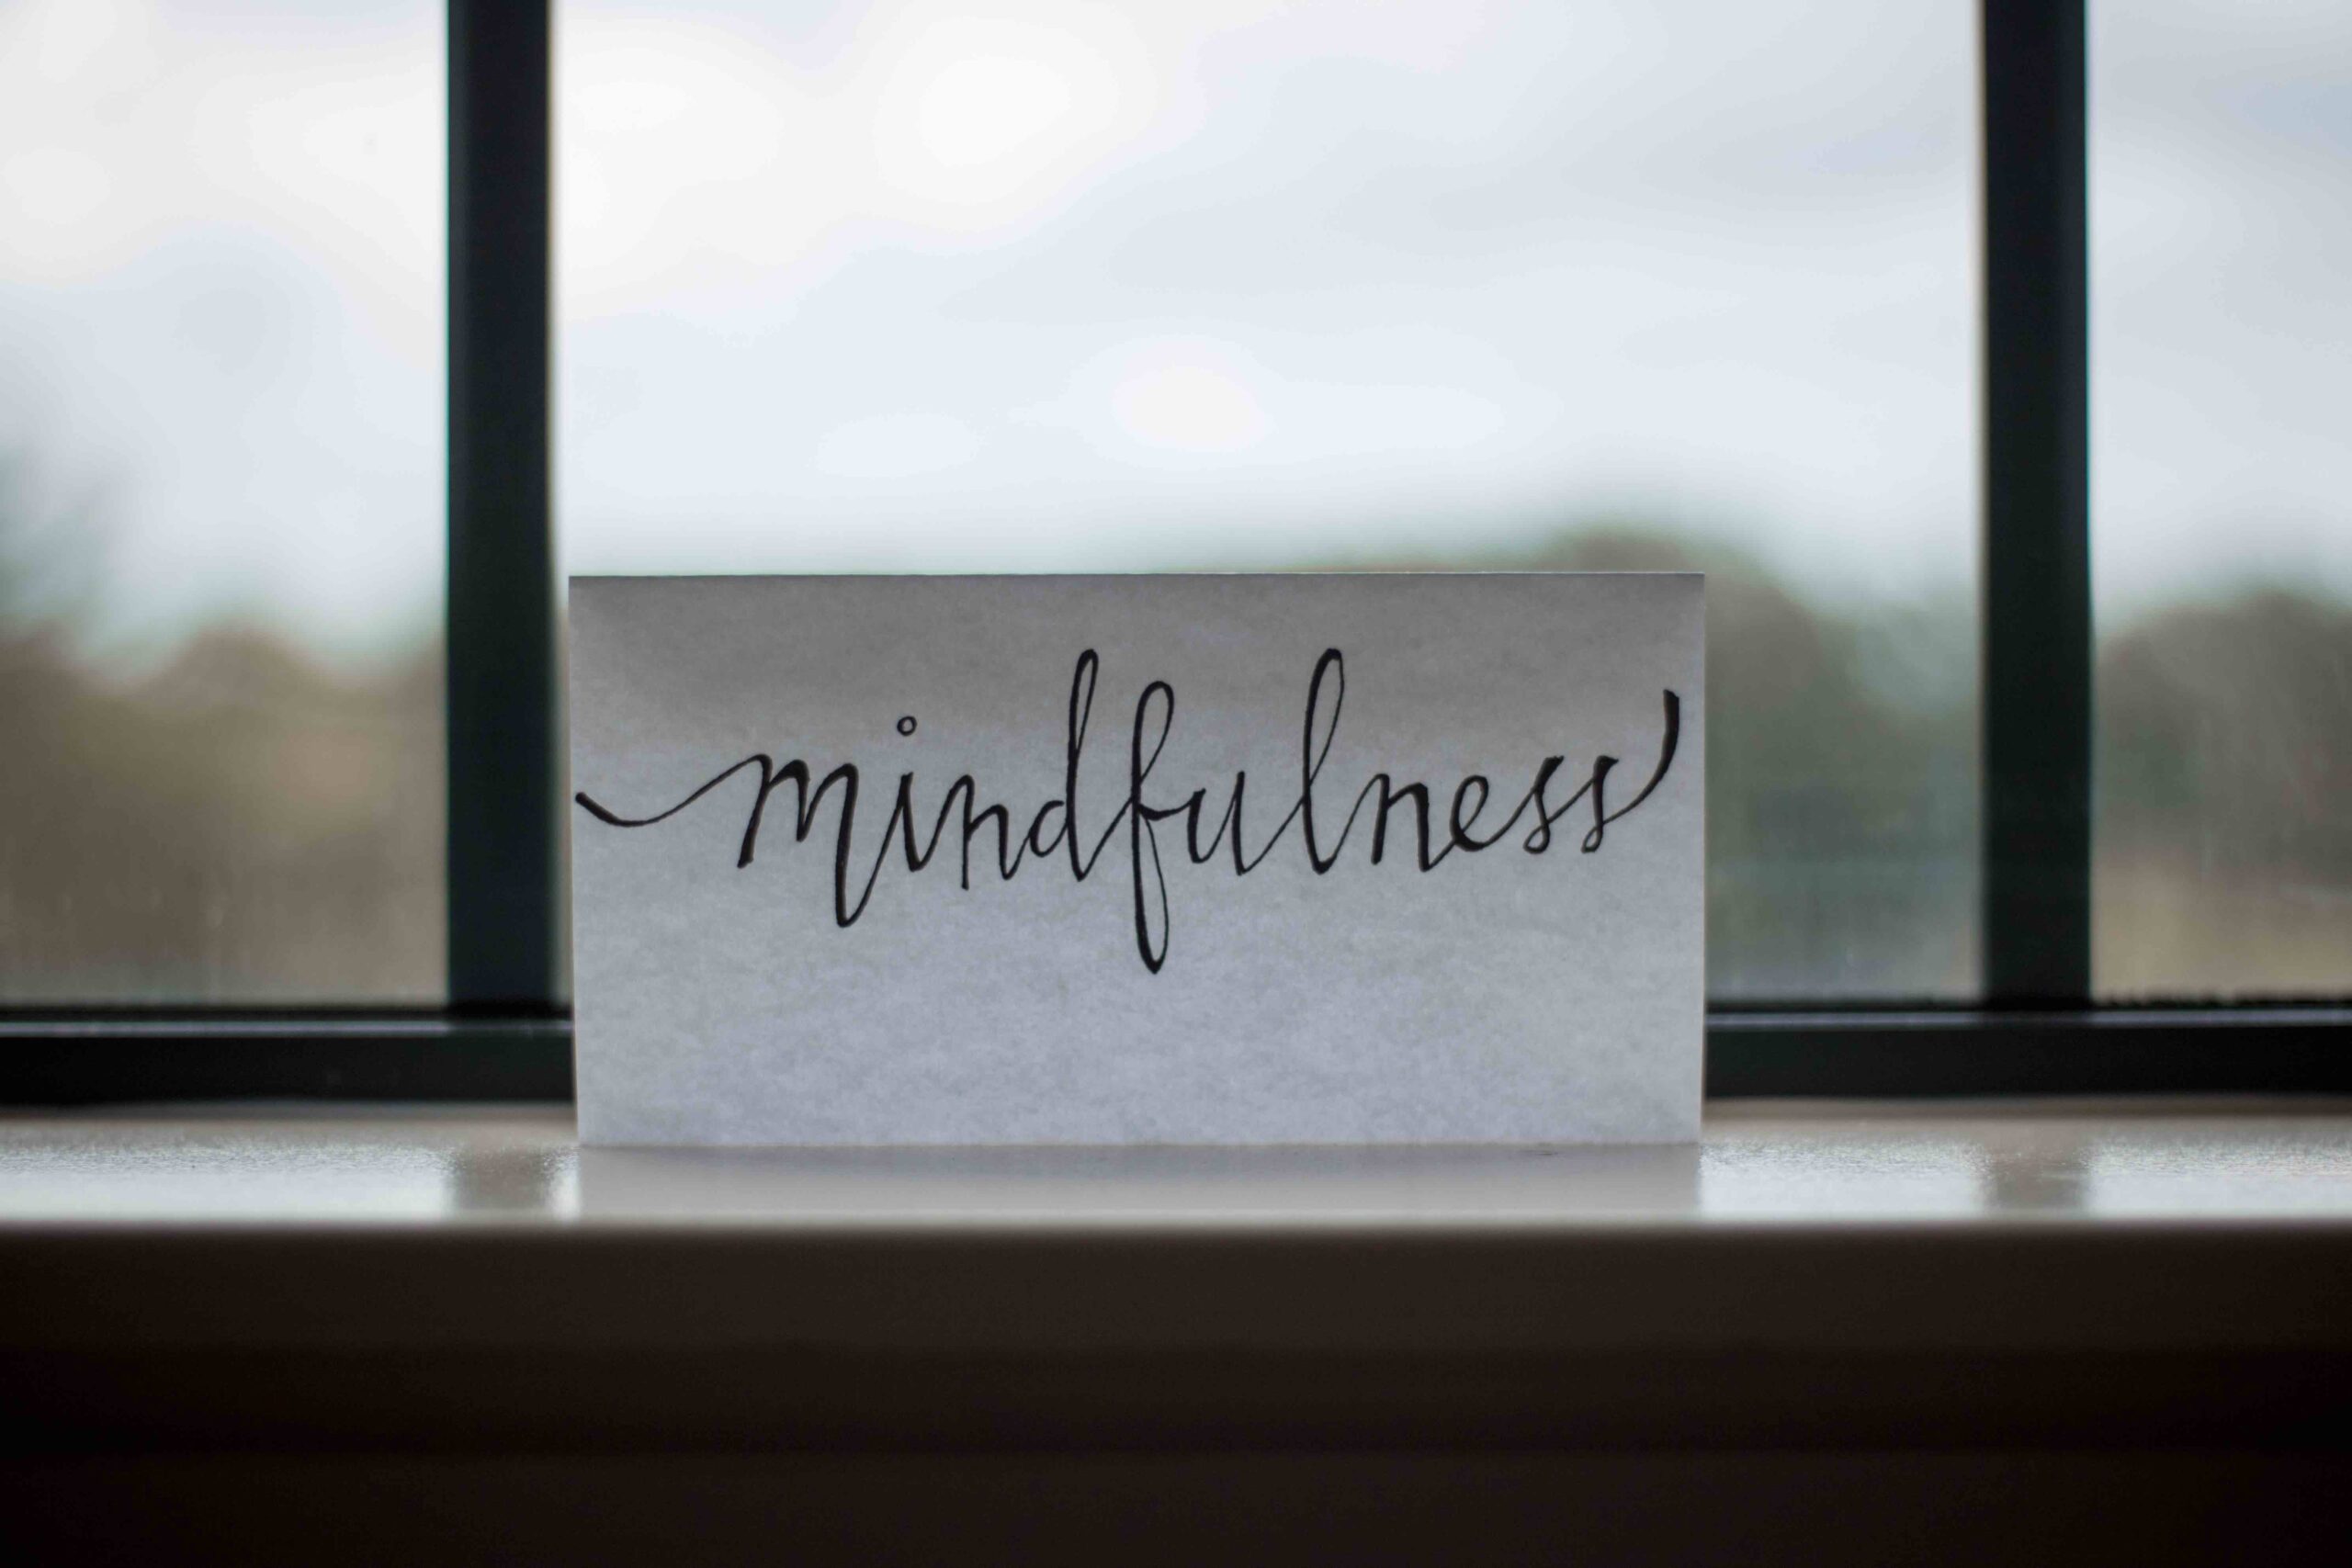 Image Description: Paper in window that reads "Mindfulness" Adjunctive therapies that go alongside FBT for Eating Disorders